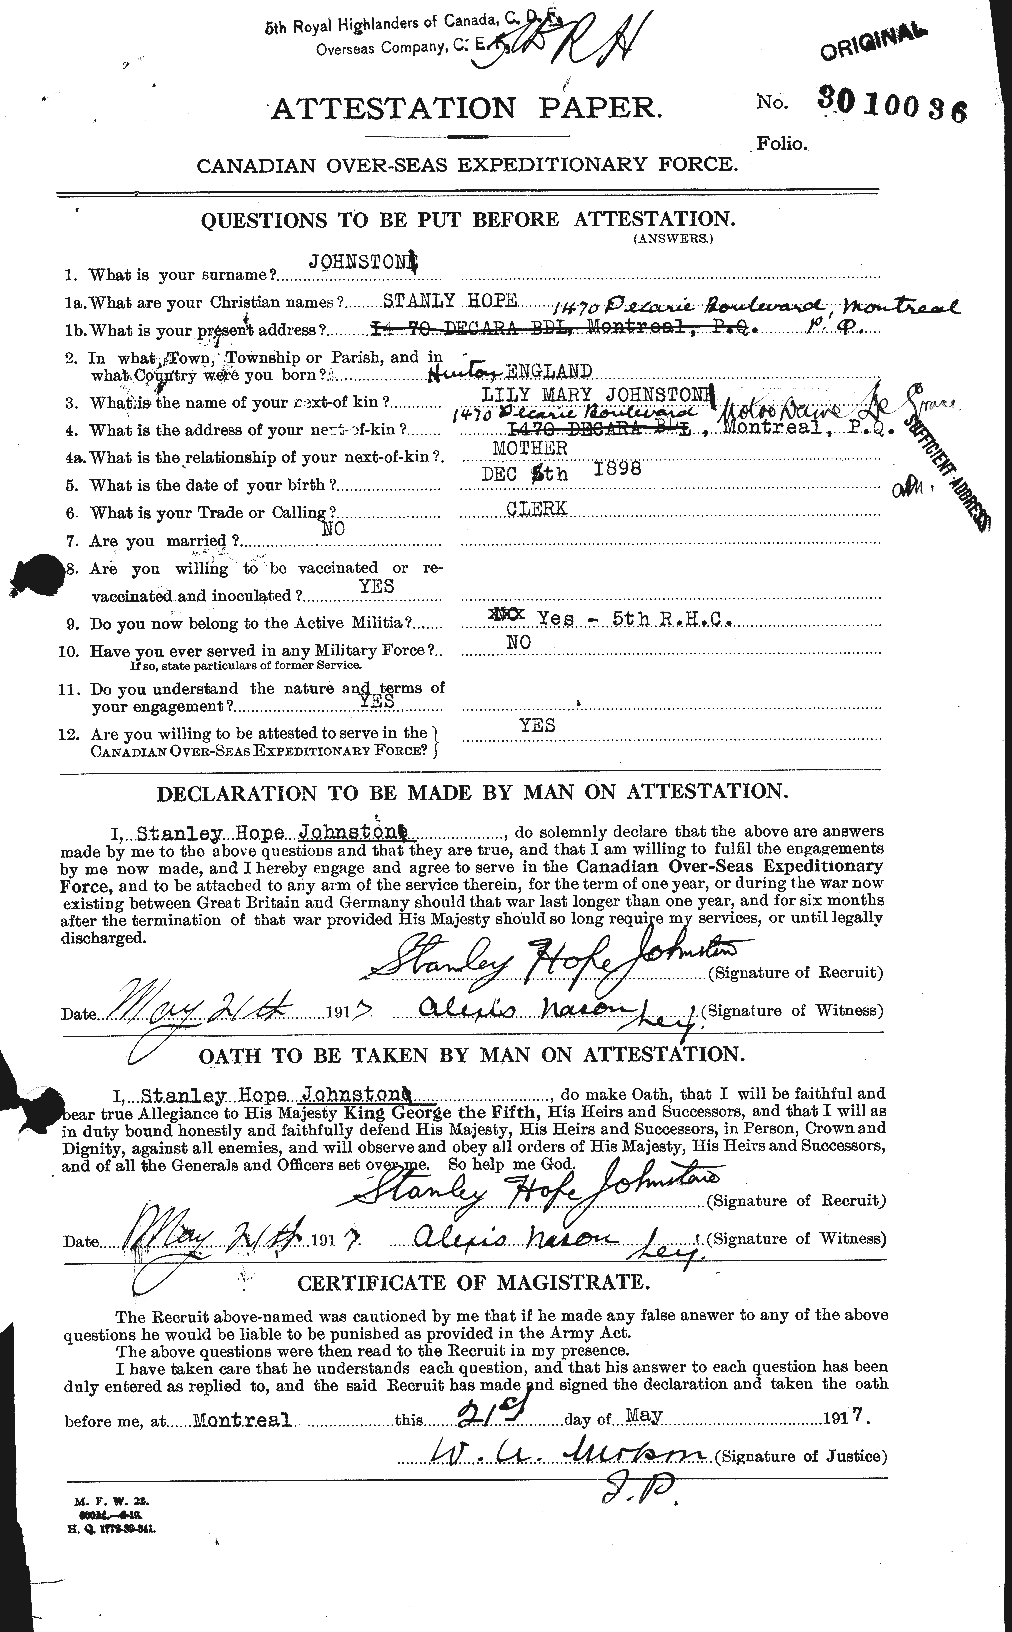 Personnel Records of the First World War - CEF 427103a